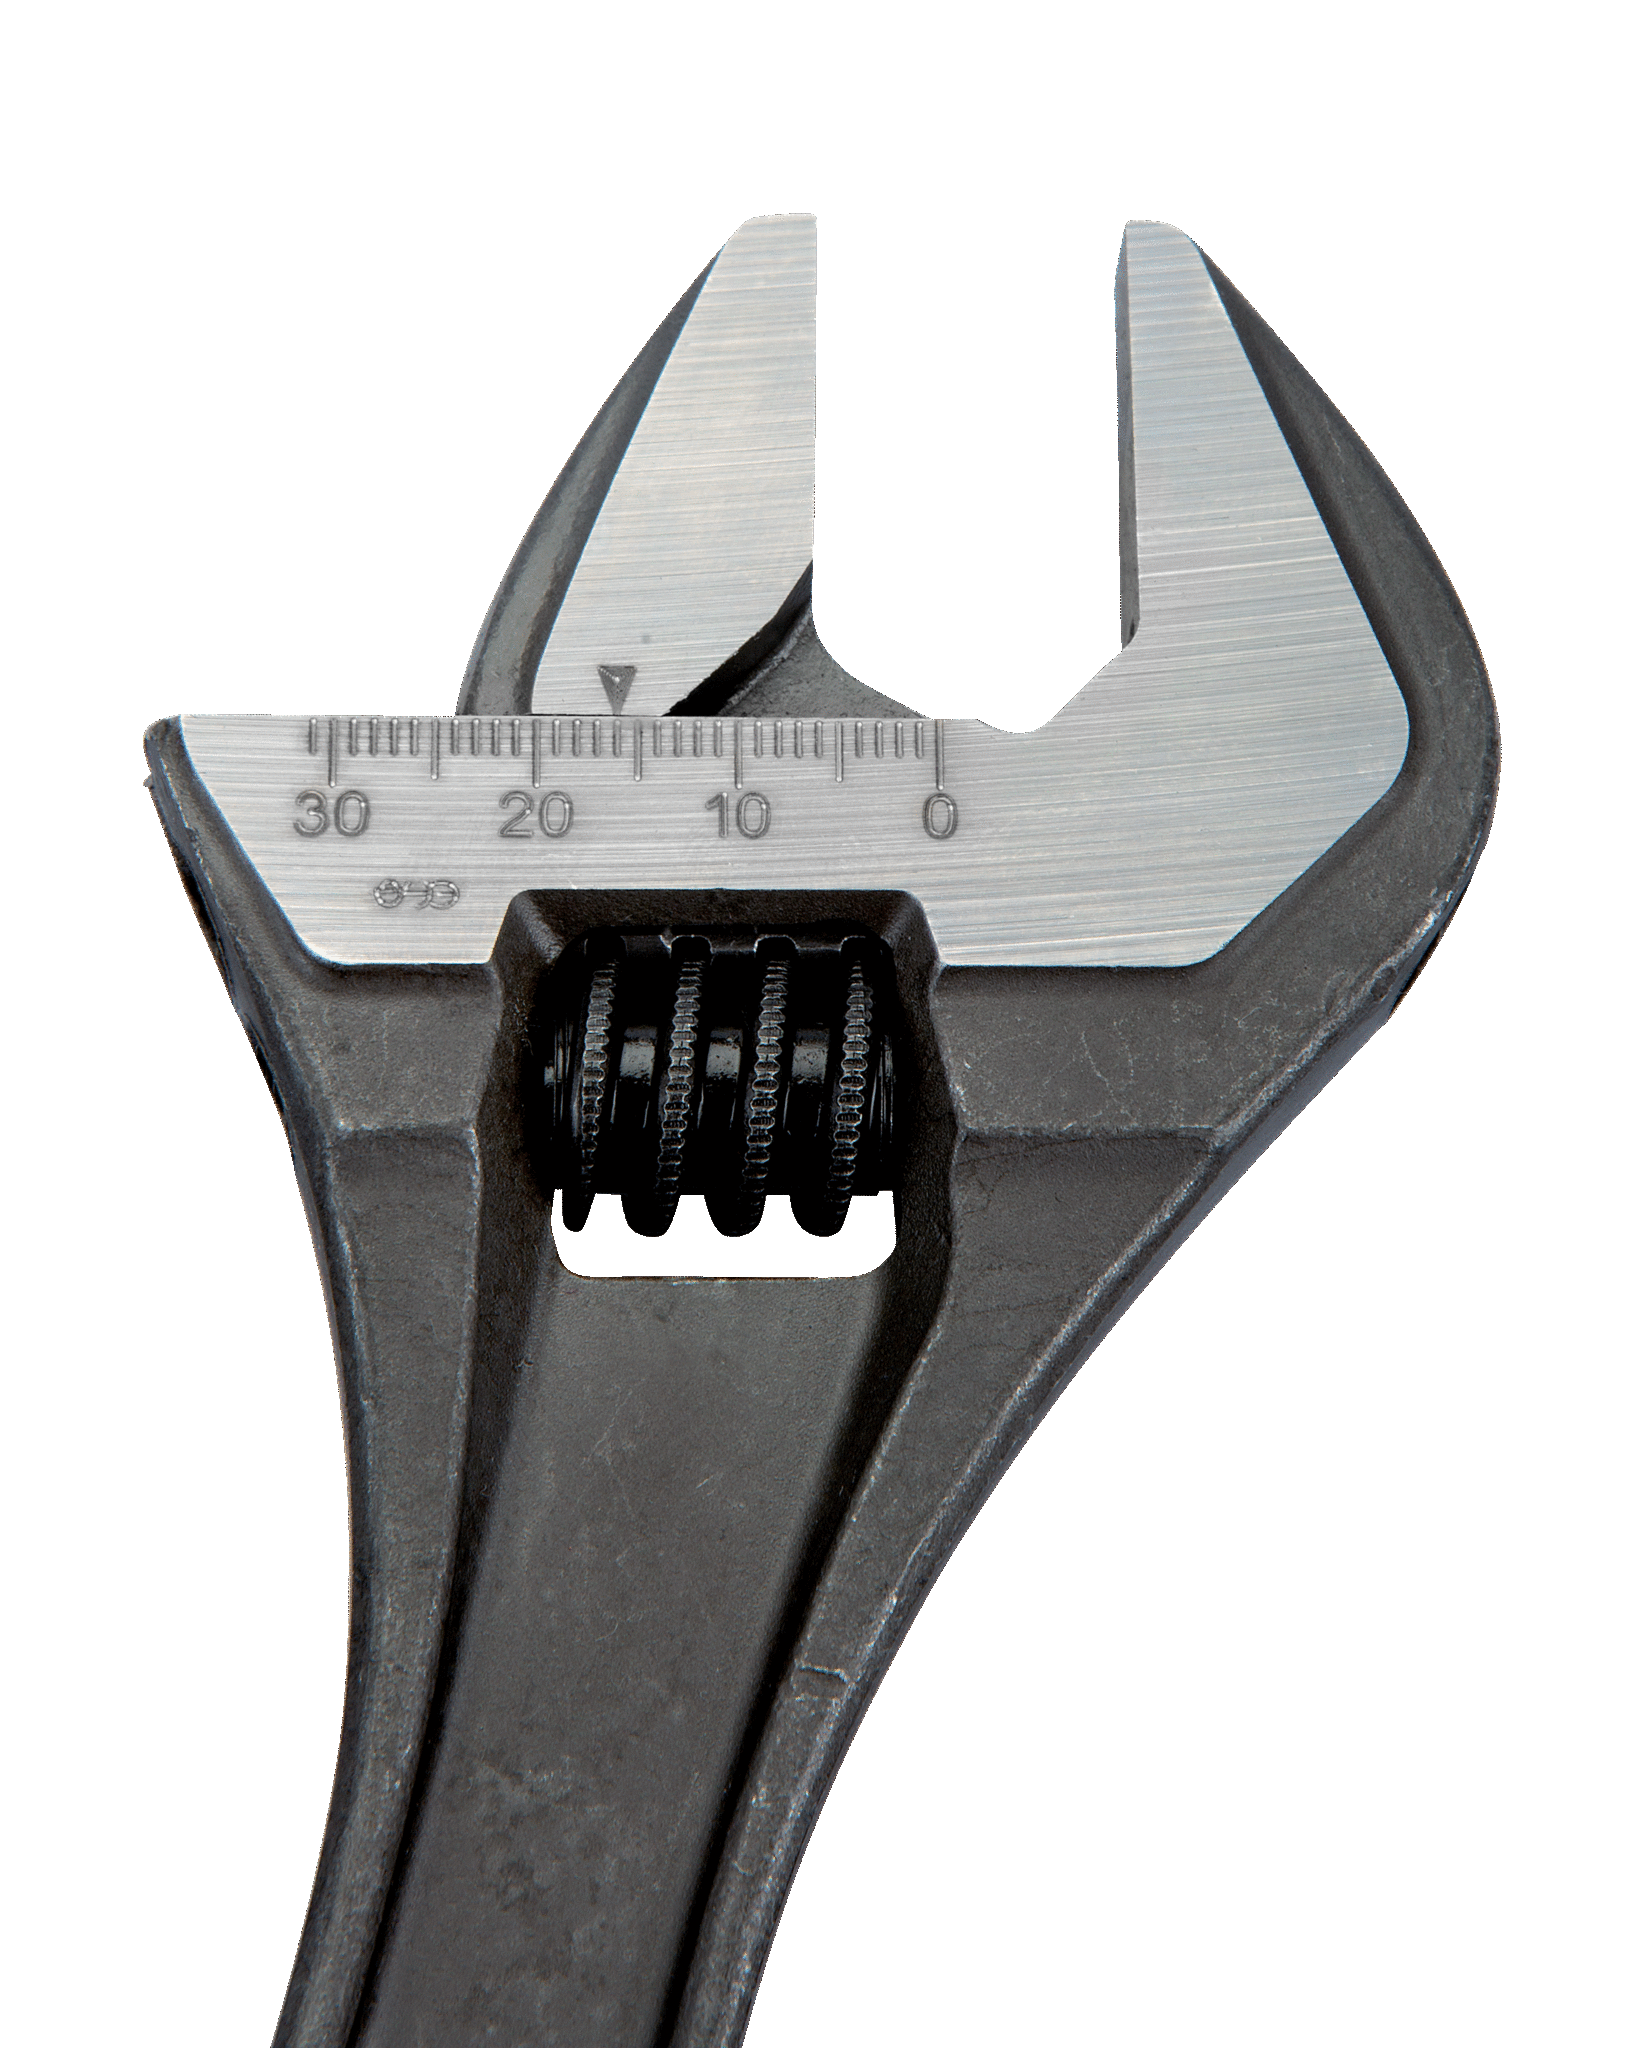 Central Nut Adjustable Wrenches with Phosphate Finish 450mm - 8075 by Bahco